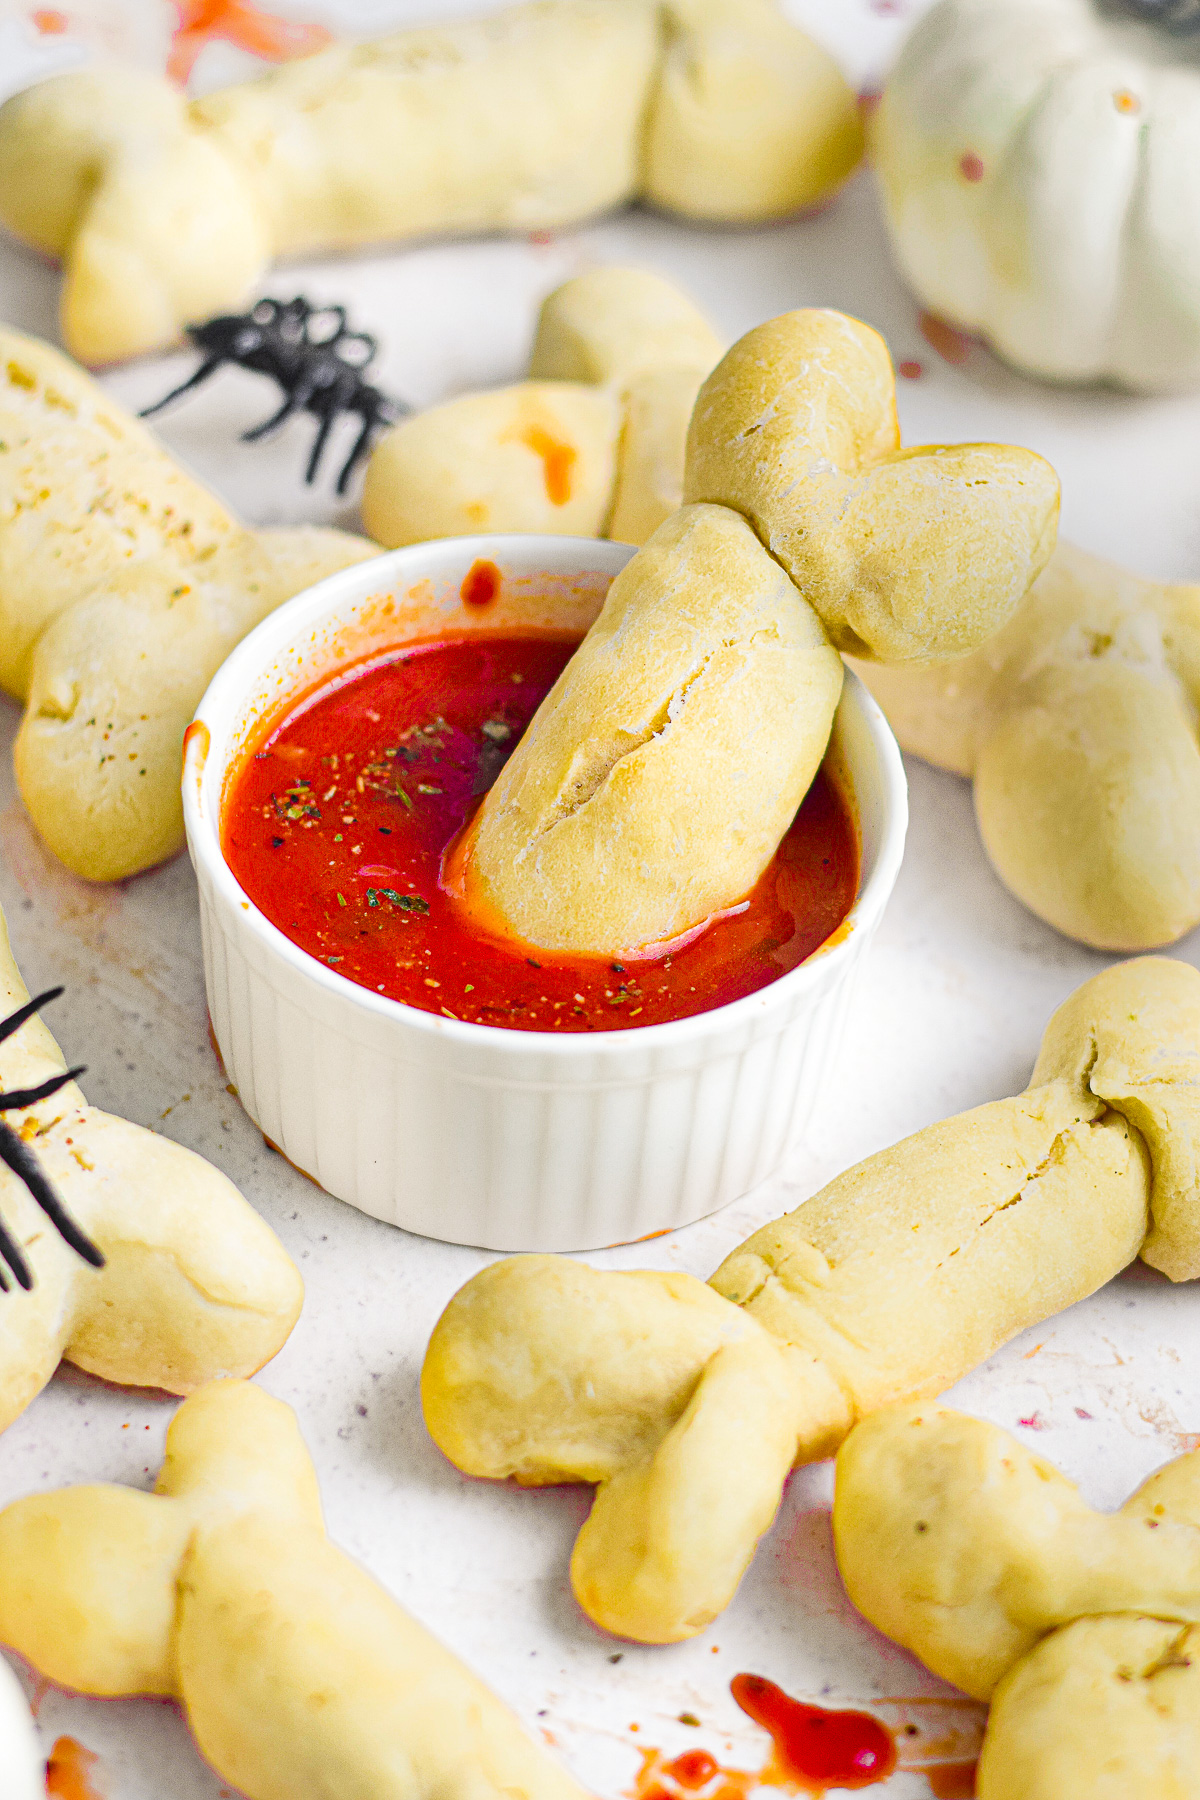 A bone shaped breadstick being dipped in a bowl with a red marinara sauce with more breadsticks nearby on the platter.